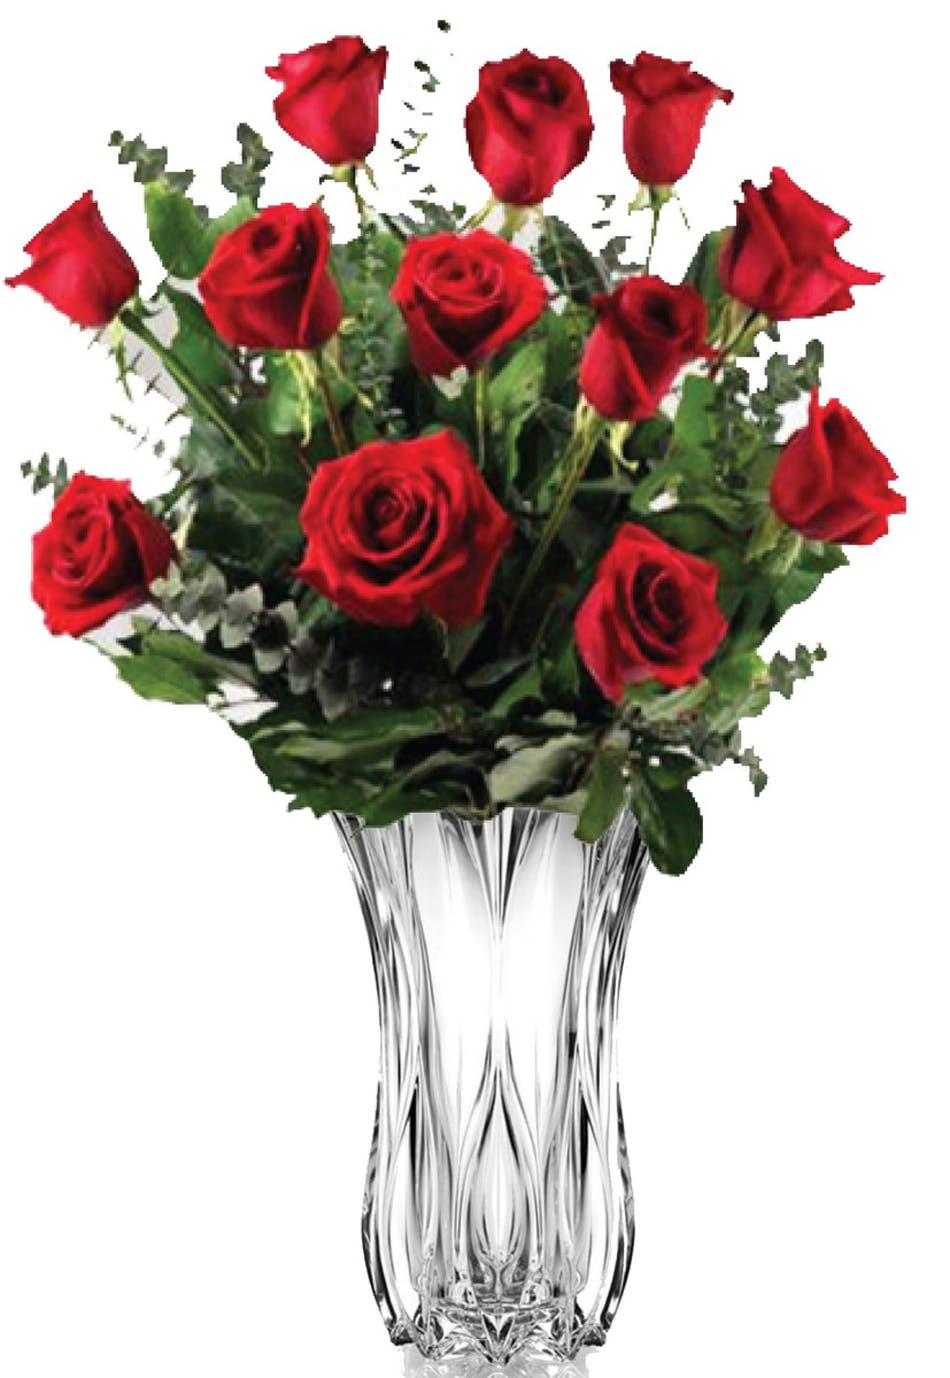 20 attractive Mikasa Florale Crystal Vase 2022 free download mikasa florale crystal vase of mikasa roses yonkers white plains ny with regard to one dozen red roses in a crystal mikasa vase